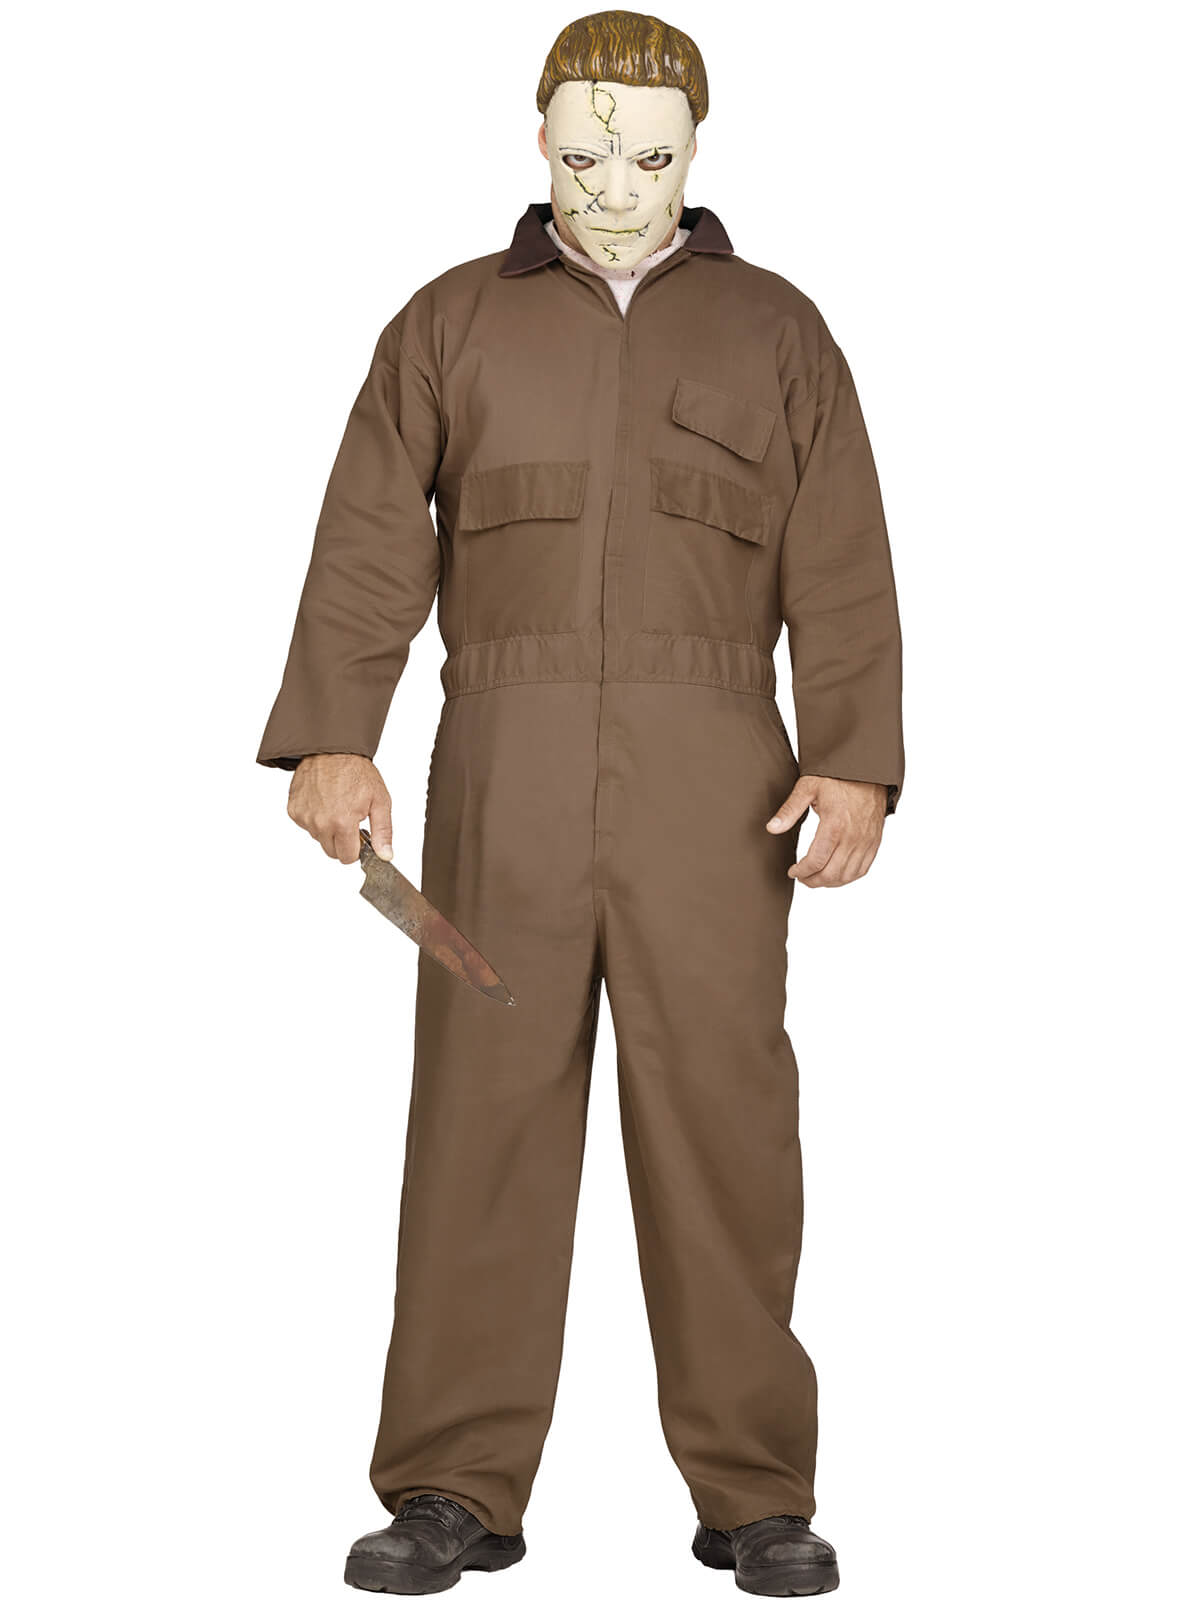 michael myers halloween costume for adults